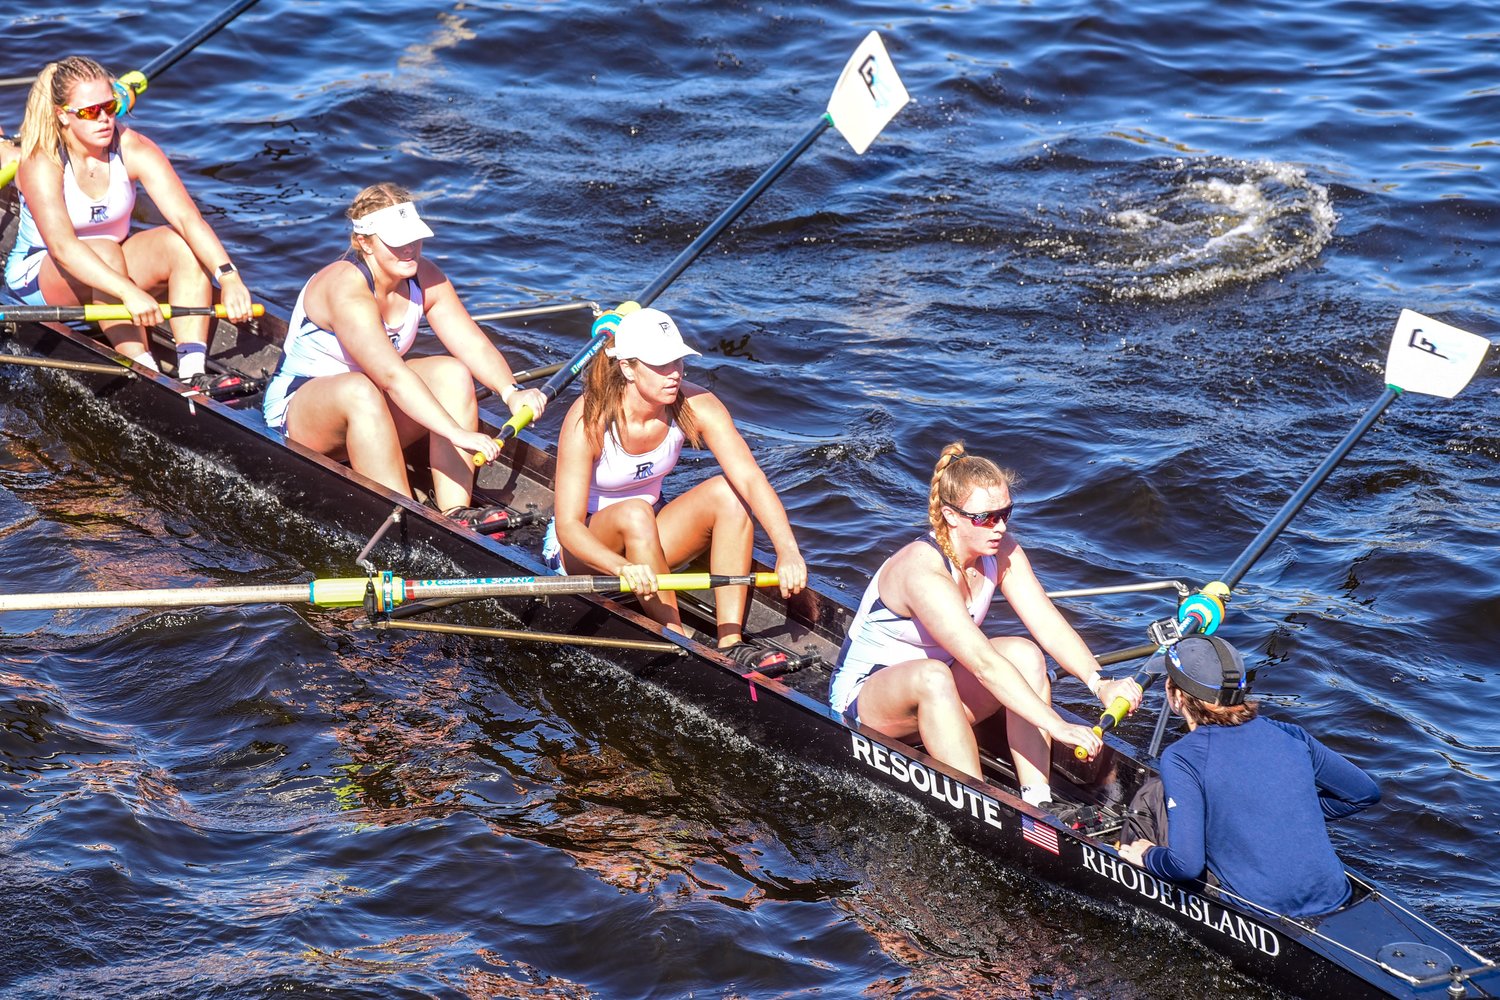 Barrington’s Julia Fortin (fourth rower from the left) is shown competing for the URI Women’s Crew team. Initially she made the URI team as a walk-on.